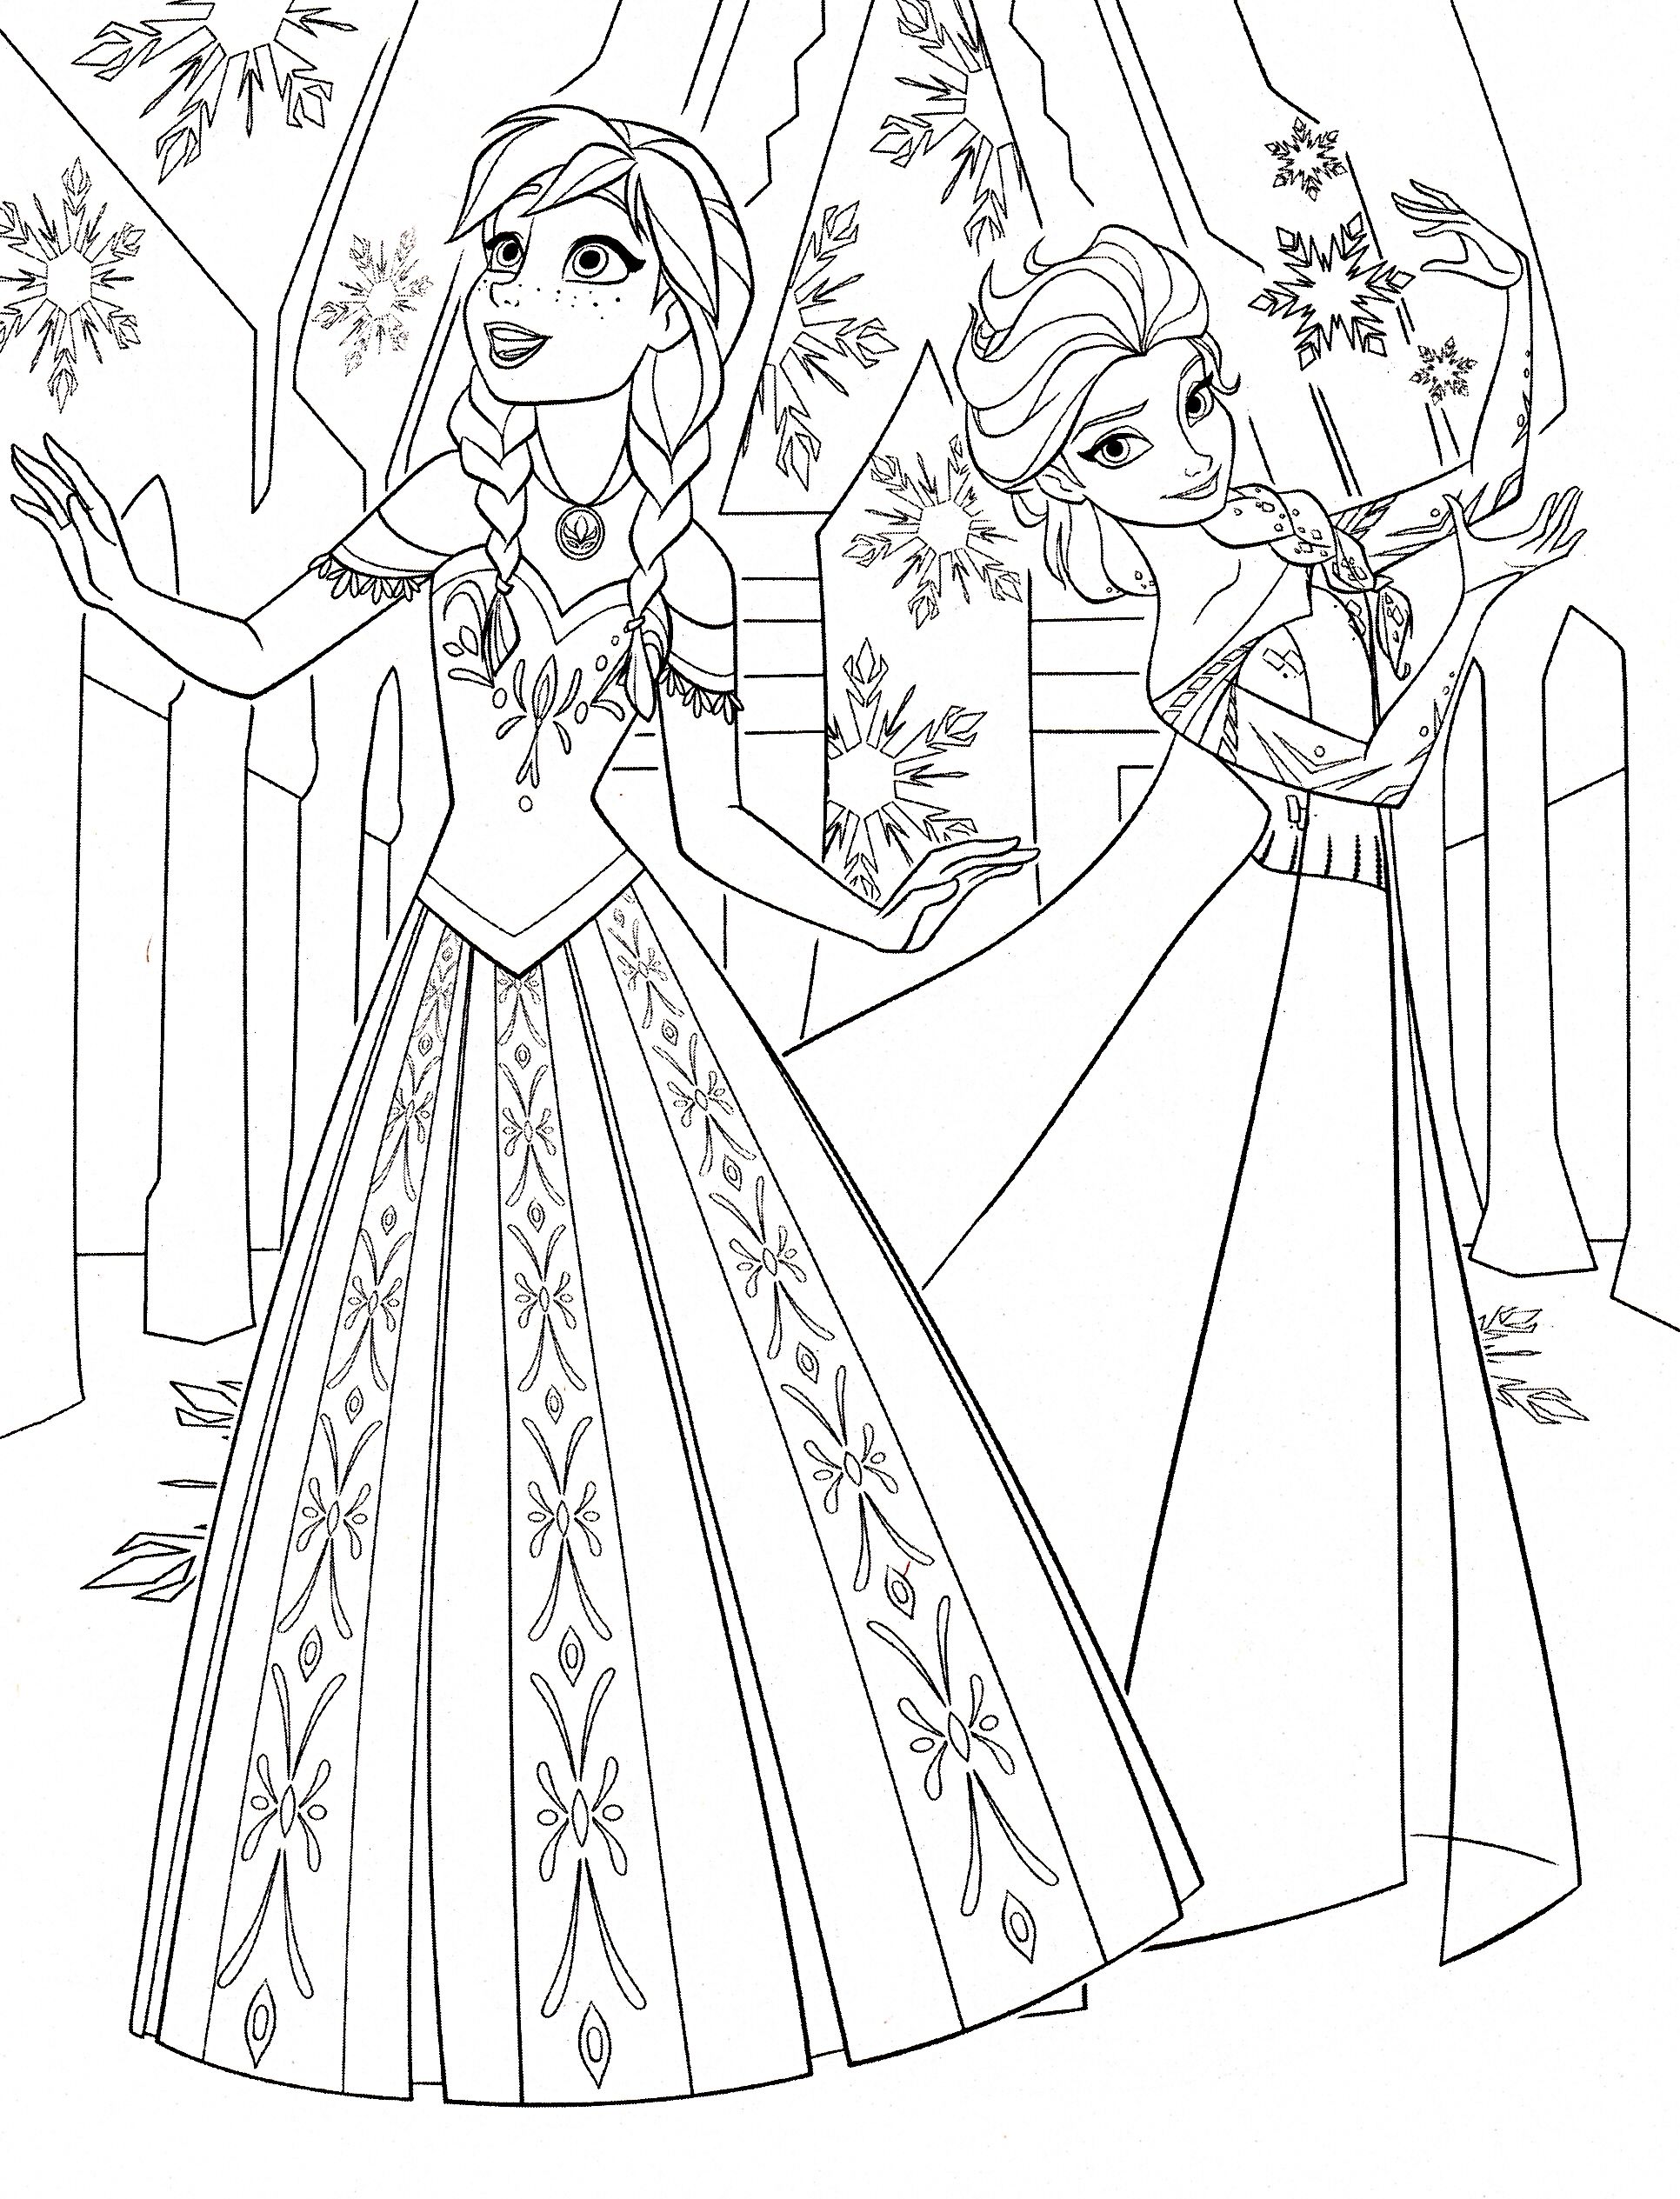 Coloring pages | Frozen Coloring ...